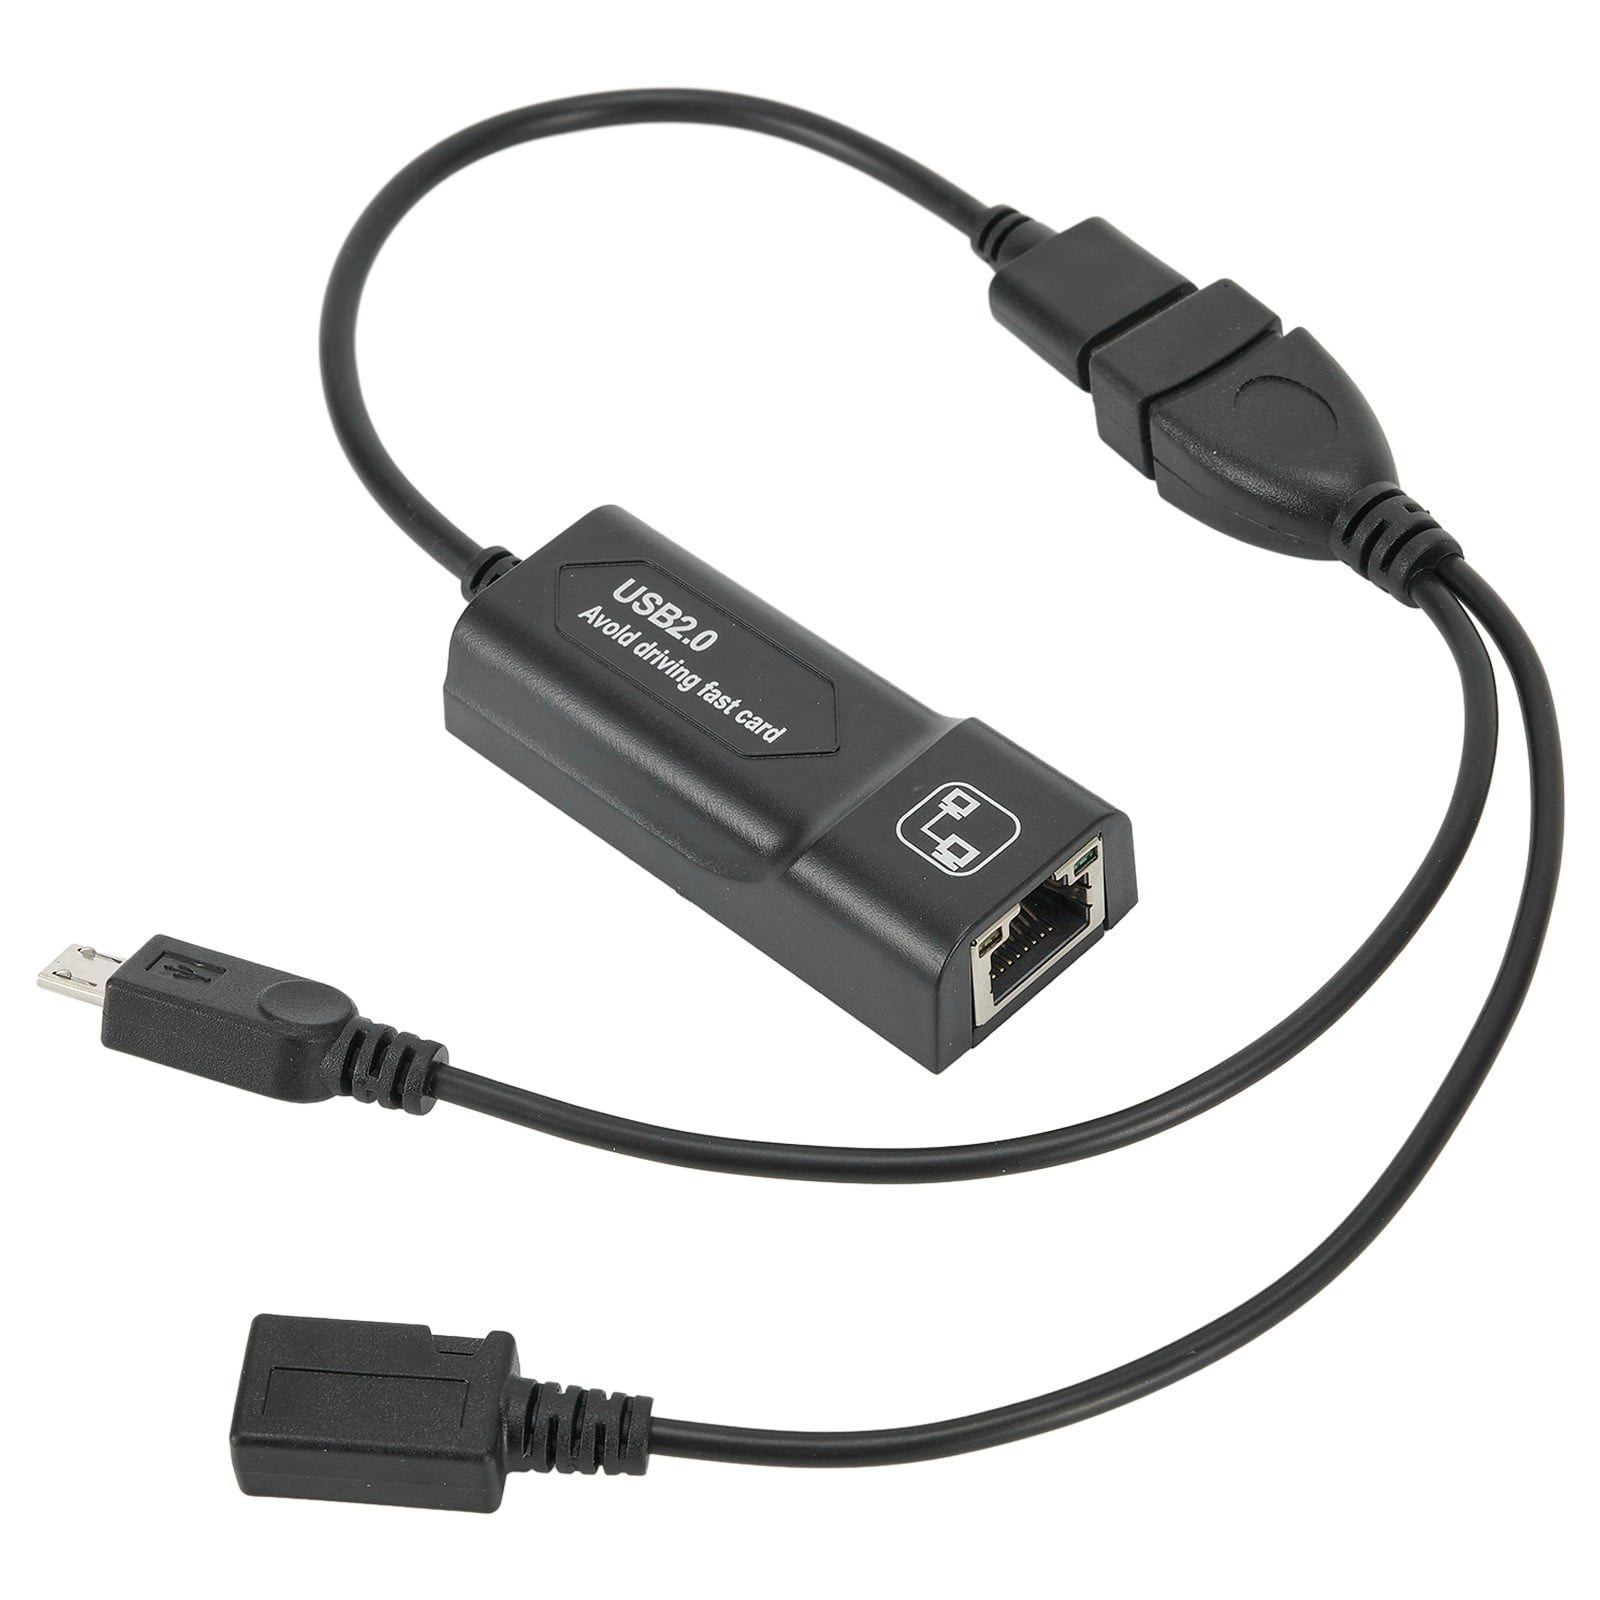 USB OTG Cable for  Fire Stick 2nd 3nd Gen Ethernet Adapter